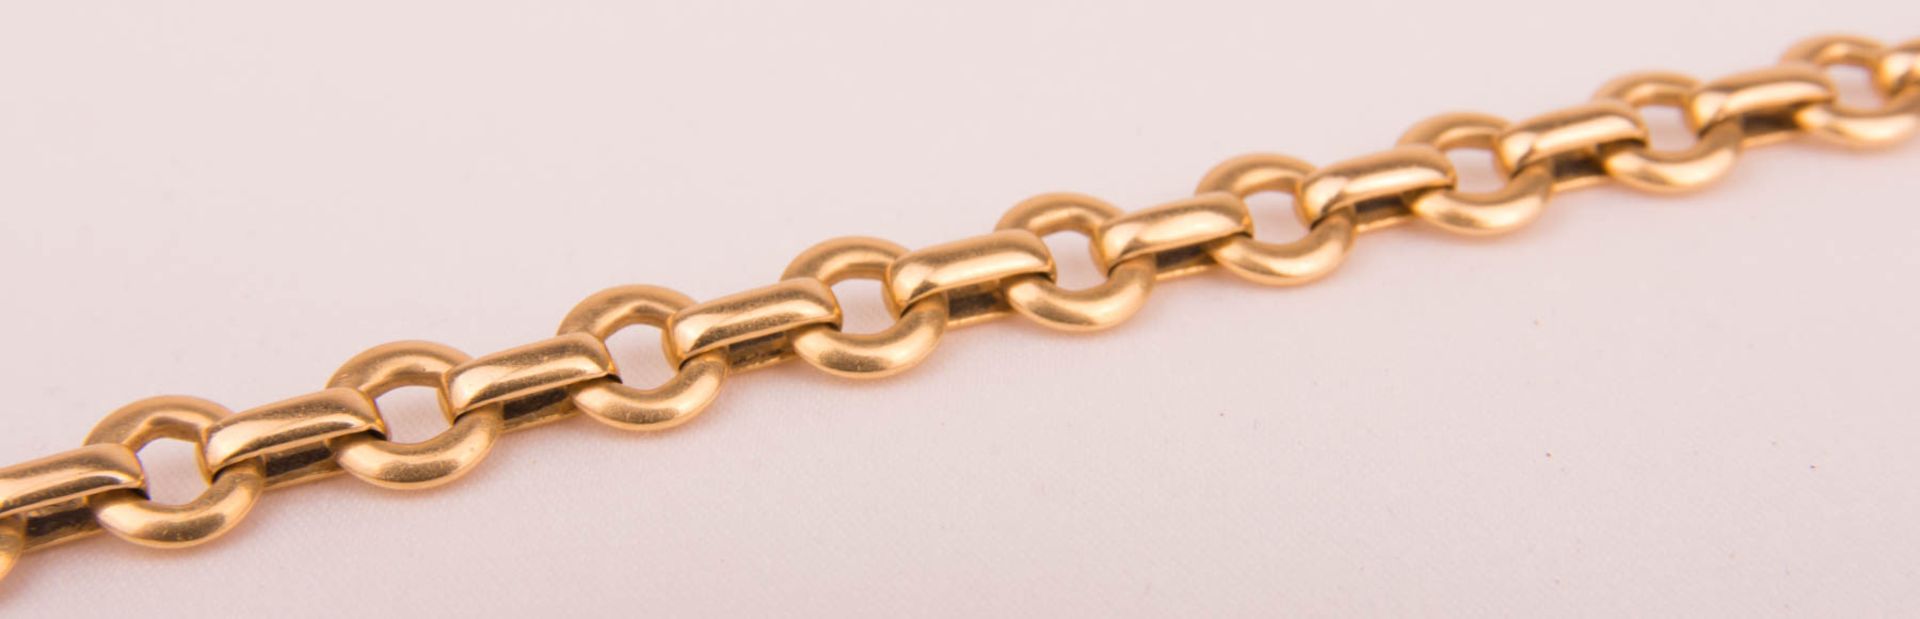 Wide Figaro anchor bracelet, 585 yellow gold. - Image 4 of 4